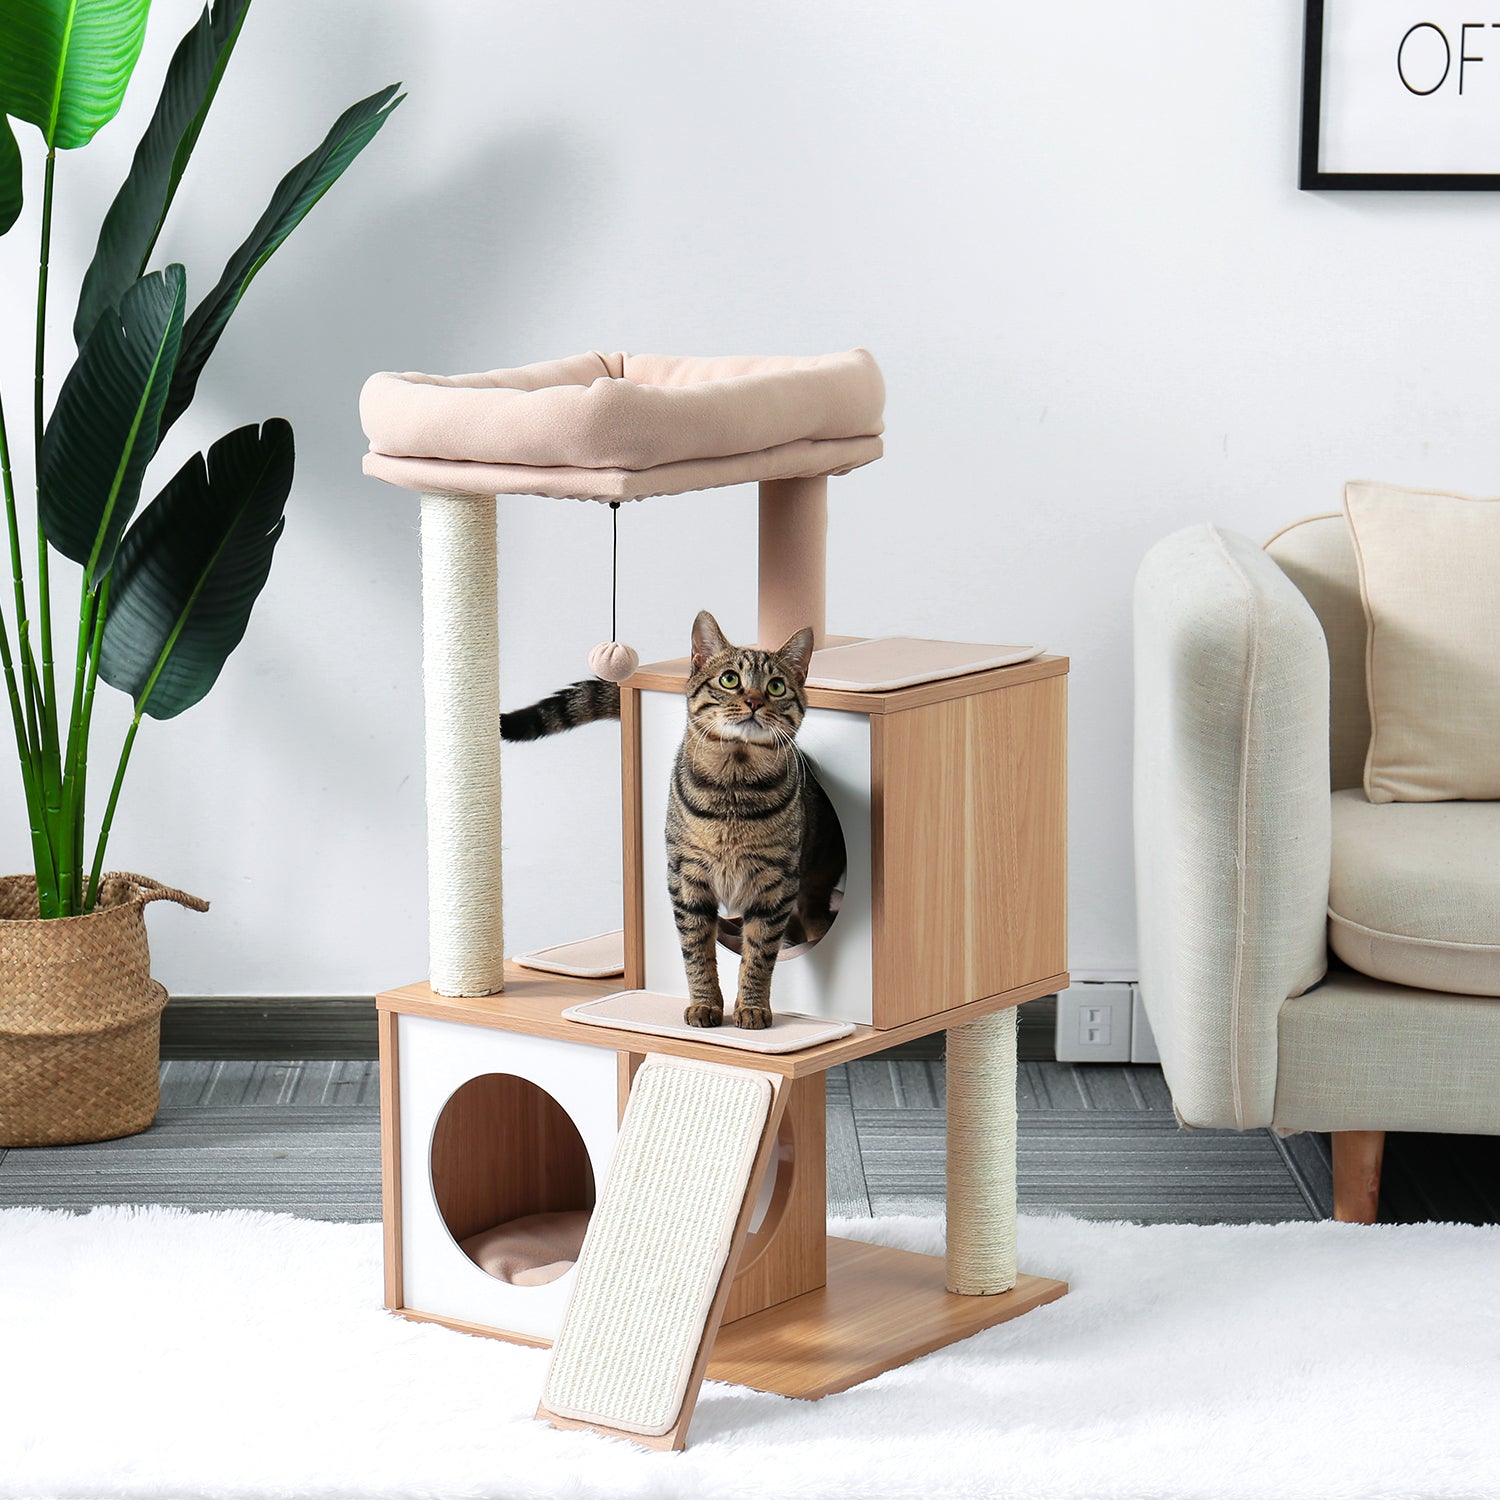 Modern Wood Cat Tree Cat Tower With Double Condos Spacious Perch Sisal Scratching Posts and Replaceable Dangling Balls